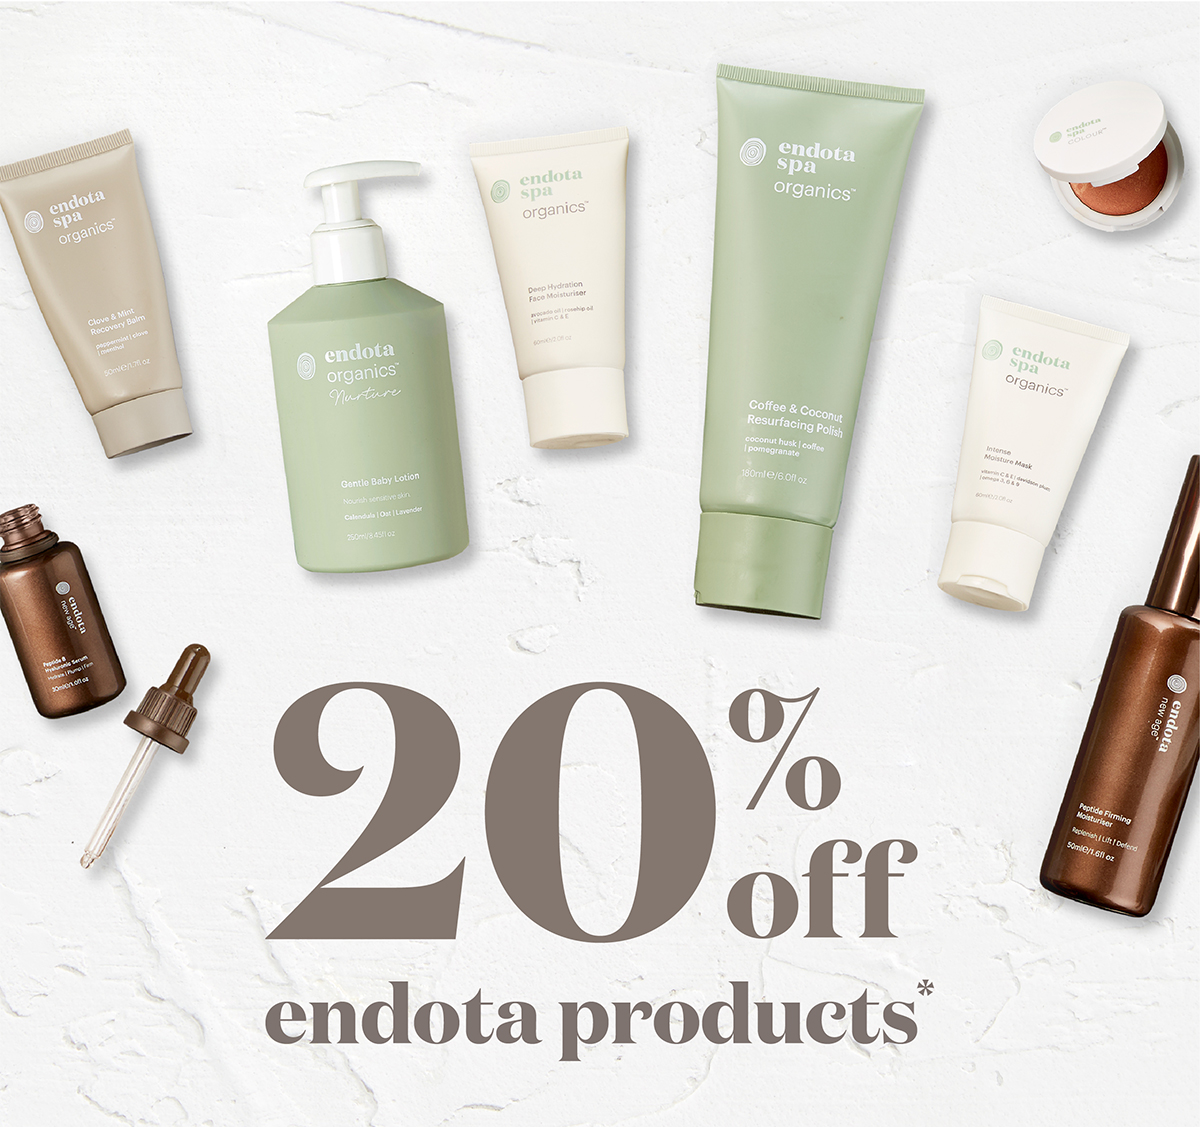 20% off endota products*